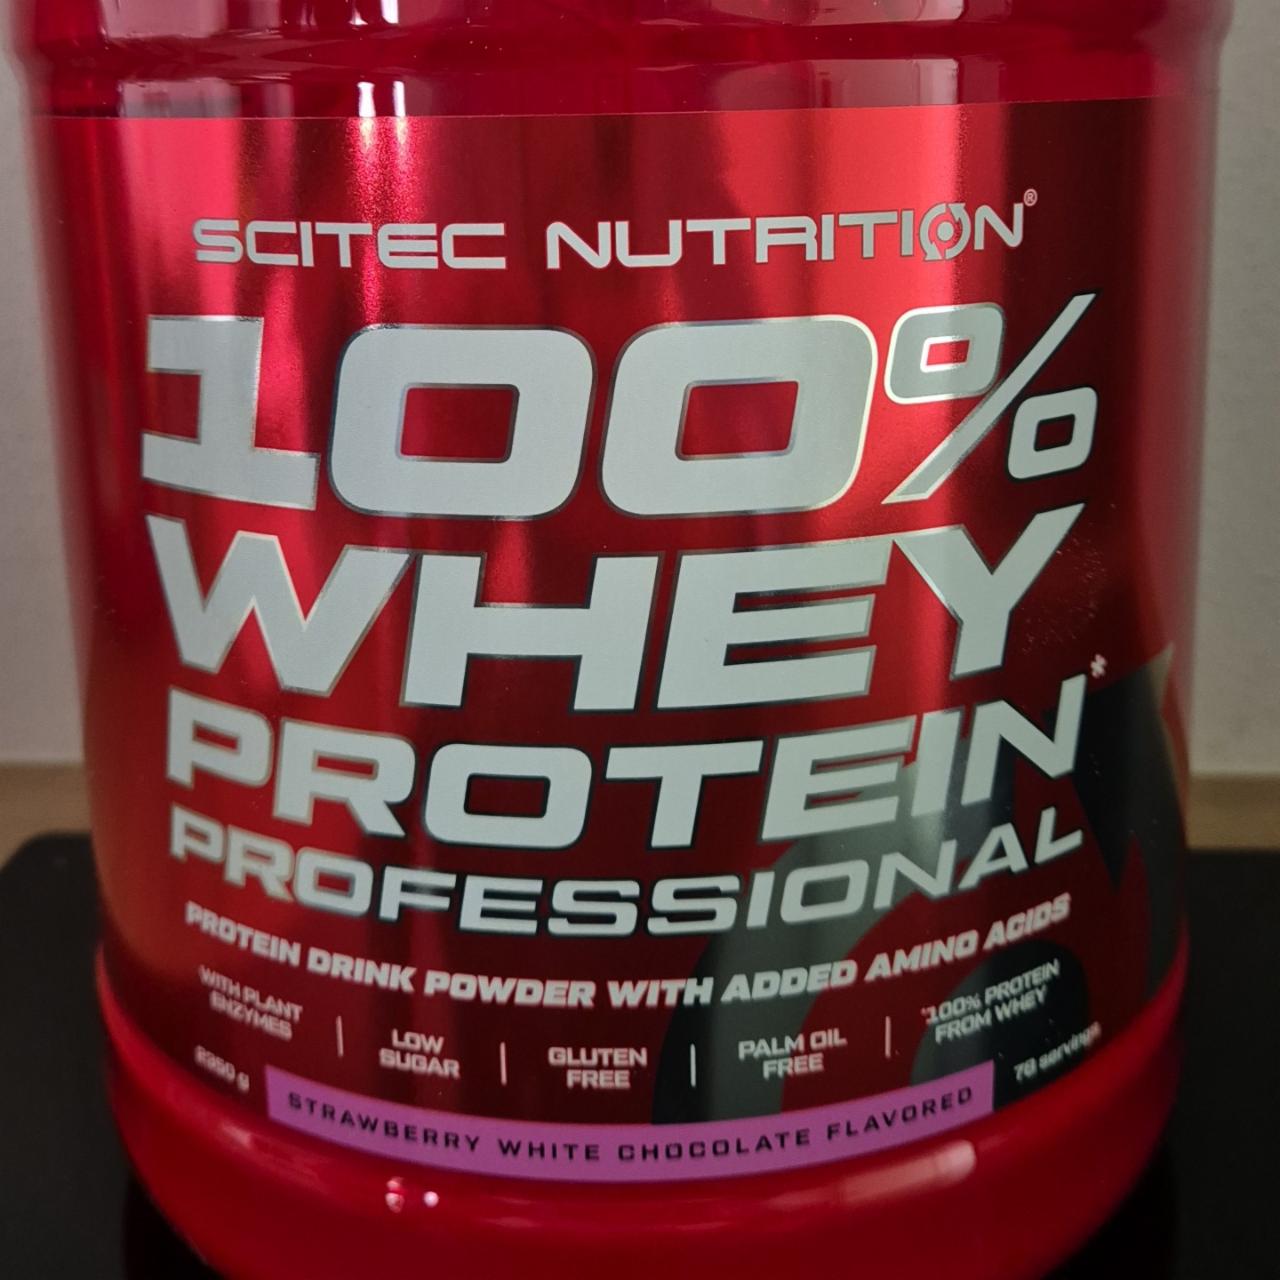 Fotografie - 100% Whey Protein Professional Strawberry White Chocolate flavored Scitec Nutrition